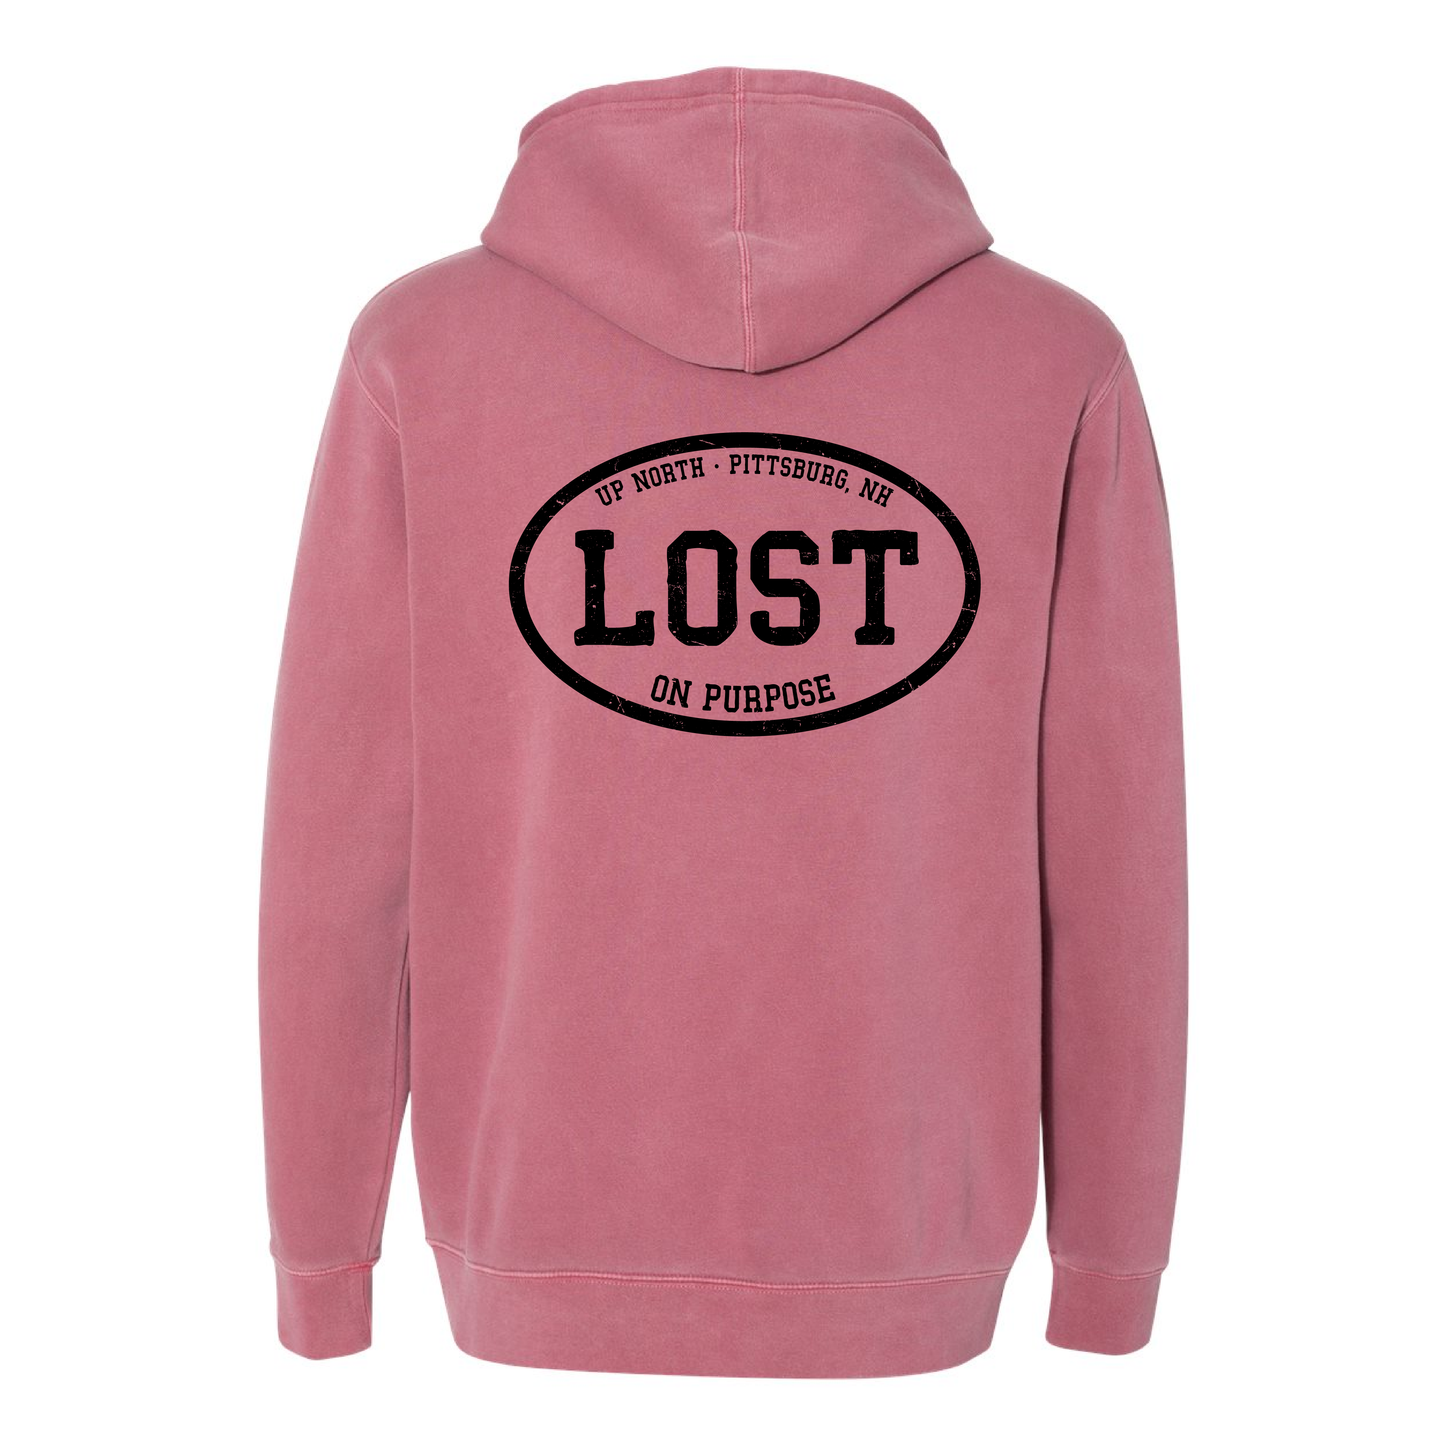 Lost on Purpose - Pigment Dyed Hoodie - Washed Maroon